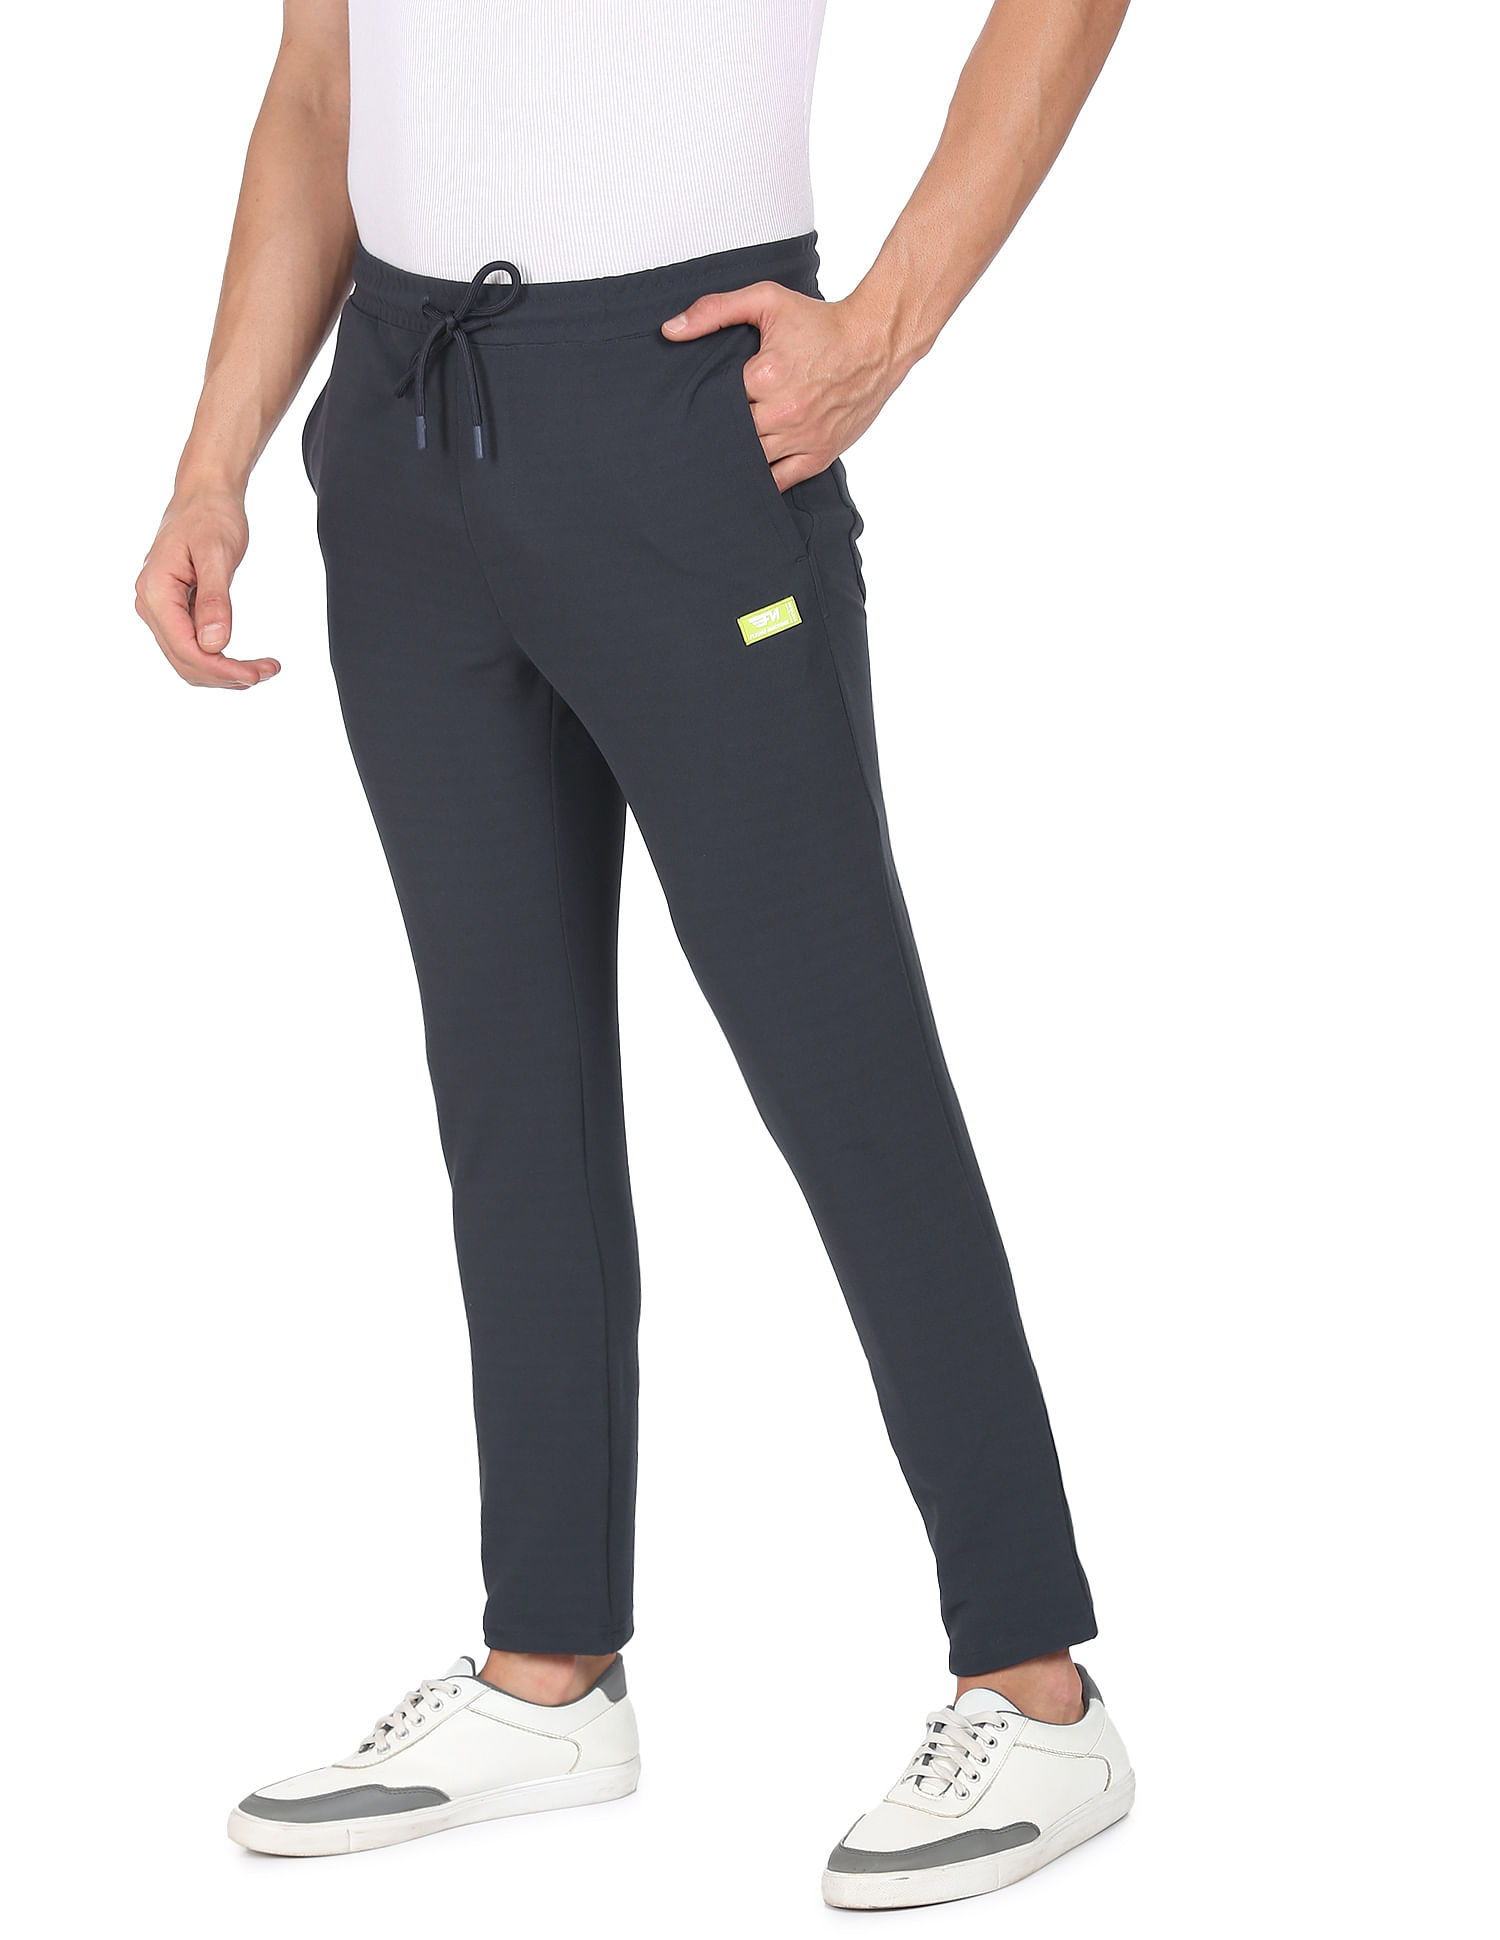 Polyester Track Pants - Buy Polyester Track Pants Online Starting at Just  ₹178 | Meesho